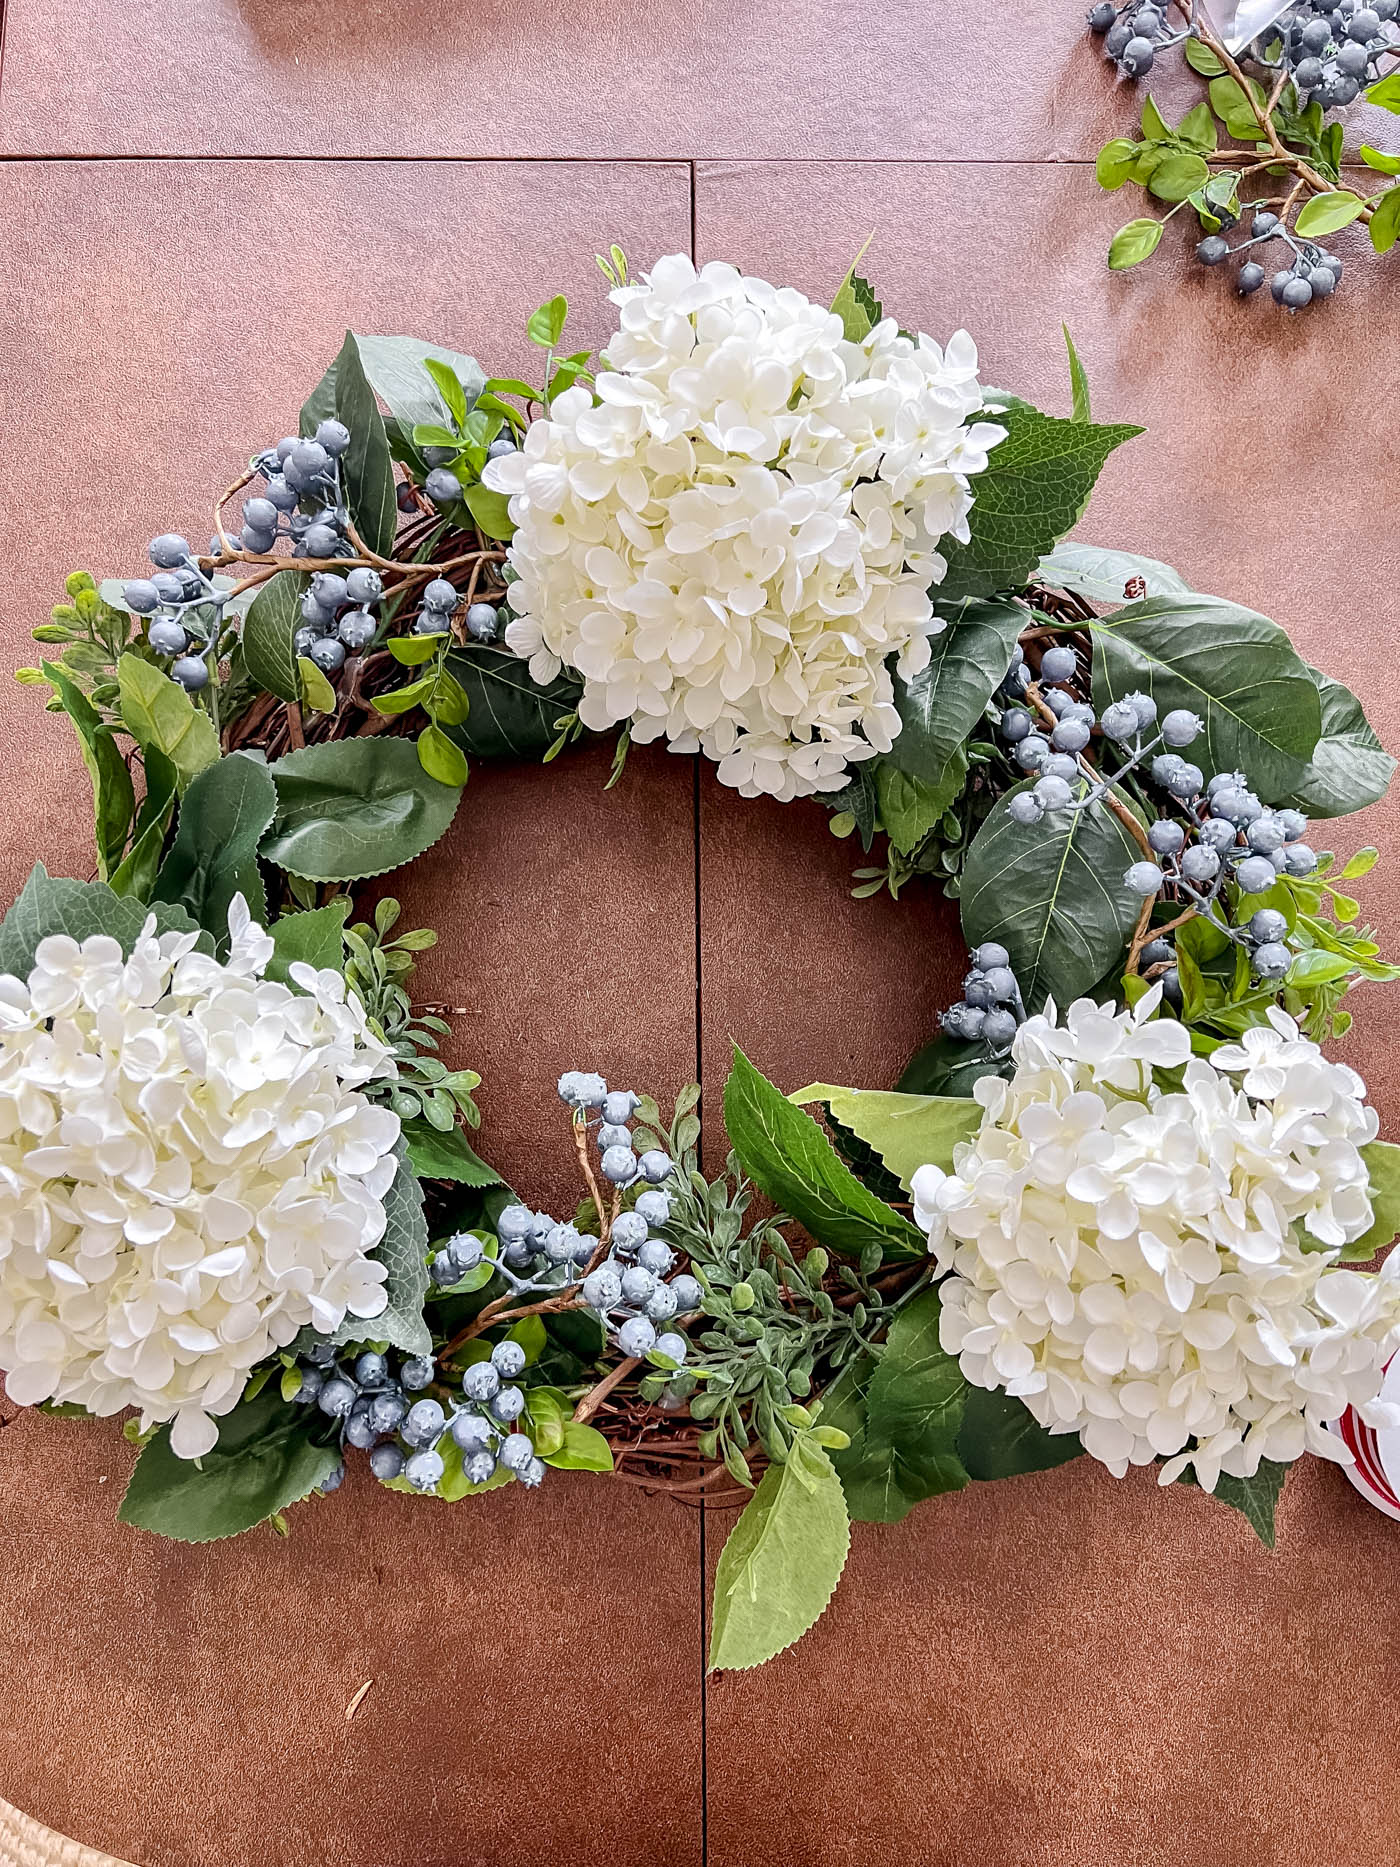 Add blueberry stems to patriotic wreath